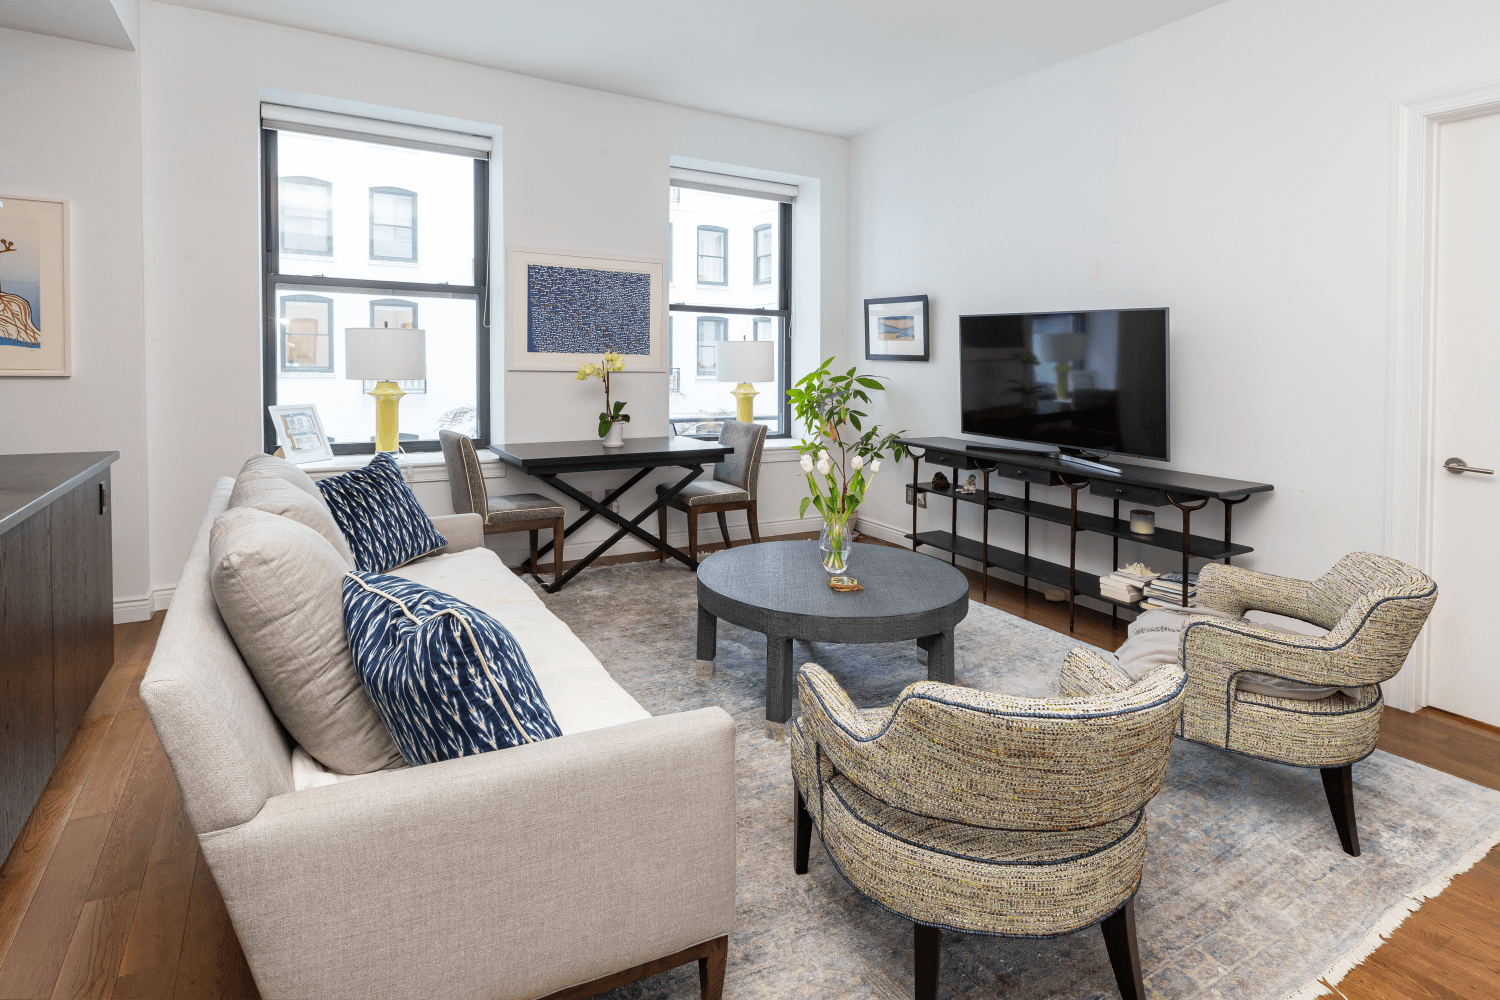 Overlooking the landscaped courtyard at The Grand Madison condominium, apartment 3N is a spacious and lofty 917 square foot 1 bedroom plus home office.